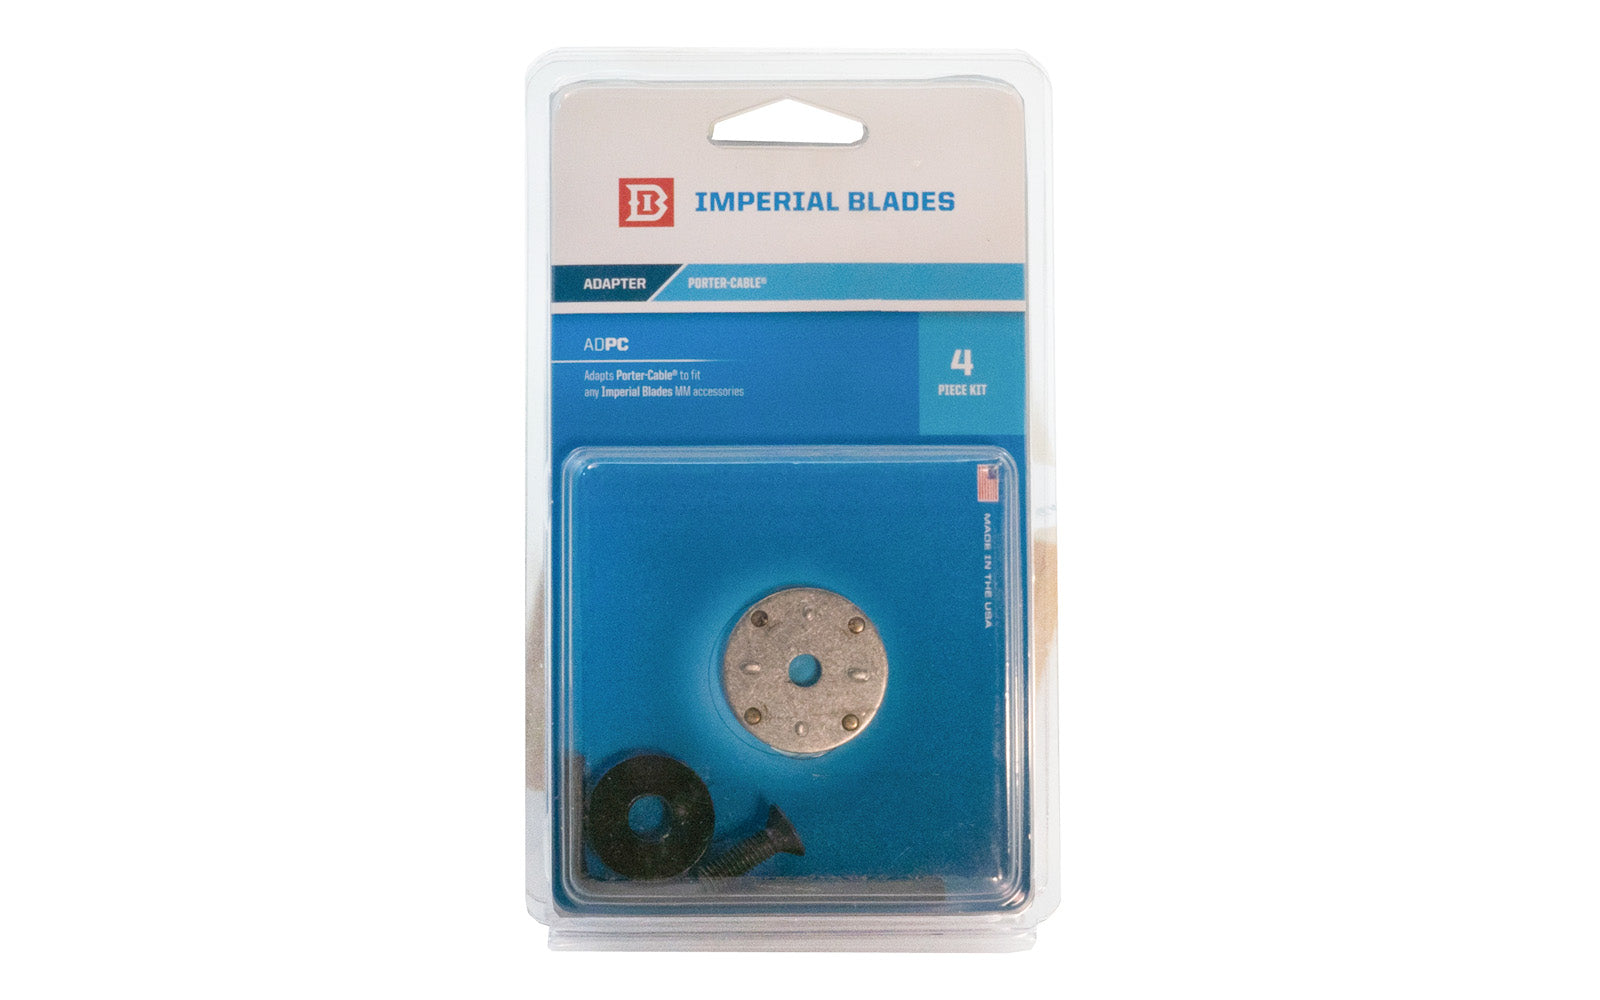 Imperial Blades Adapter - ADPC. Adapts Porter-Cable to fit any Imperial Blades MM accessories. 609456705530